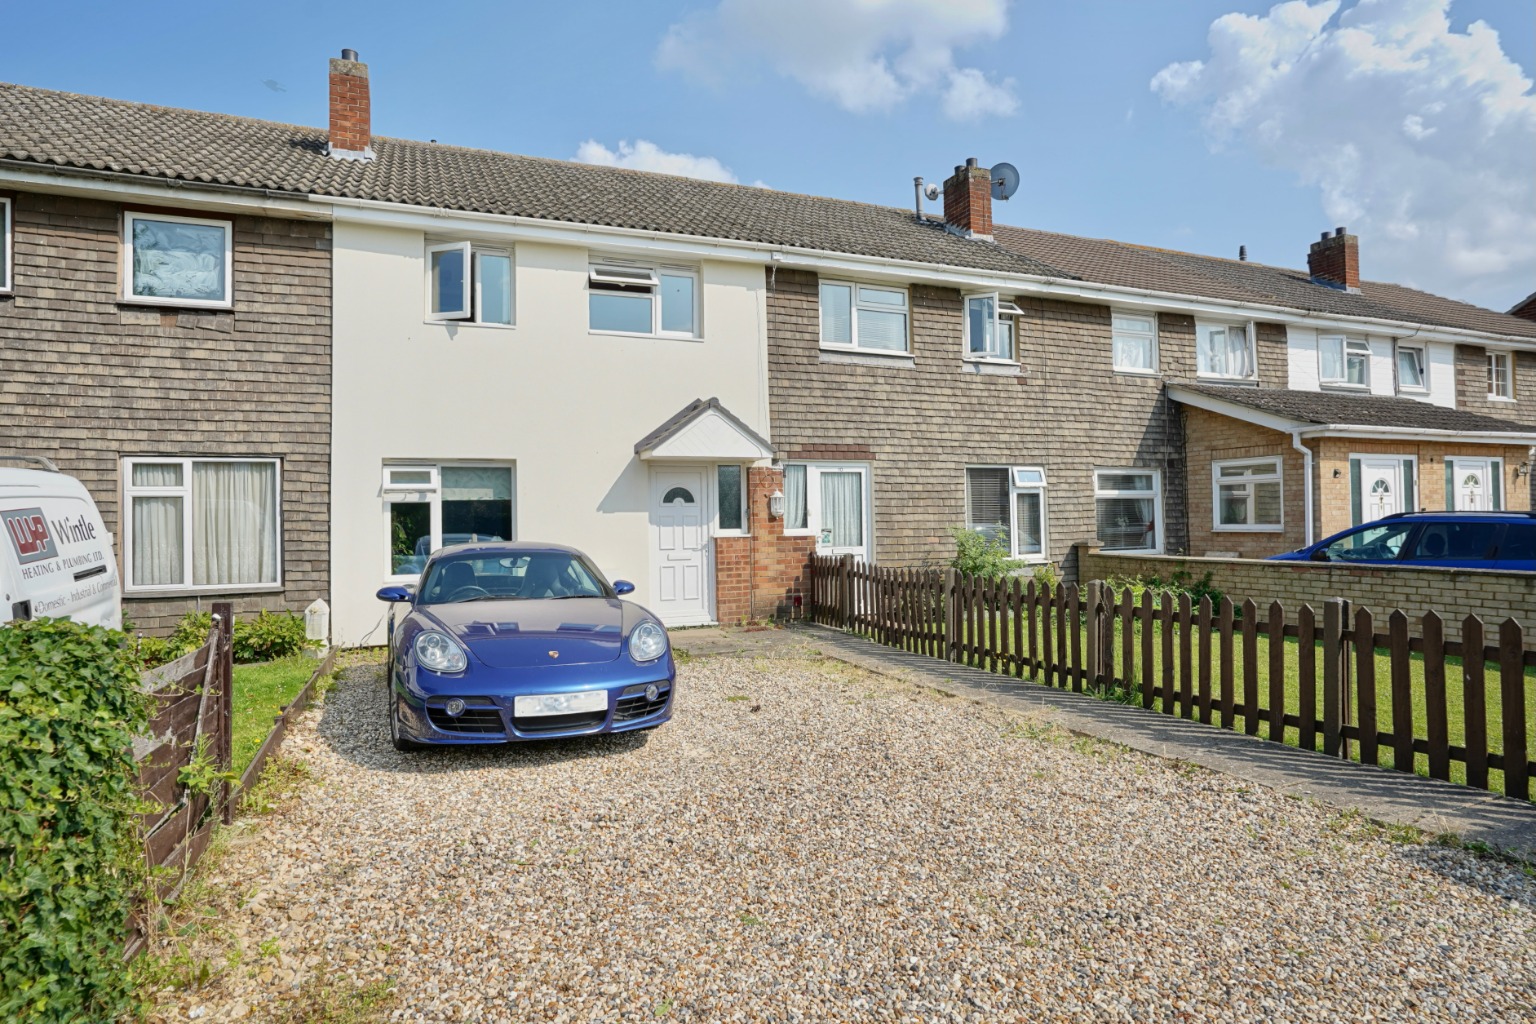 3 bed terraced house for sale in Sallowbush Road, Huntingdon - Property Image 1